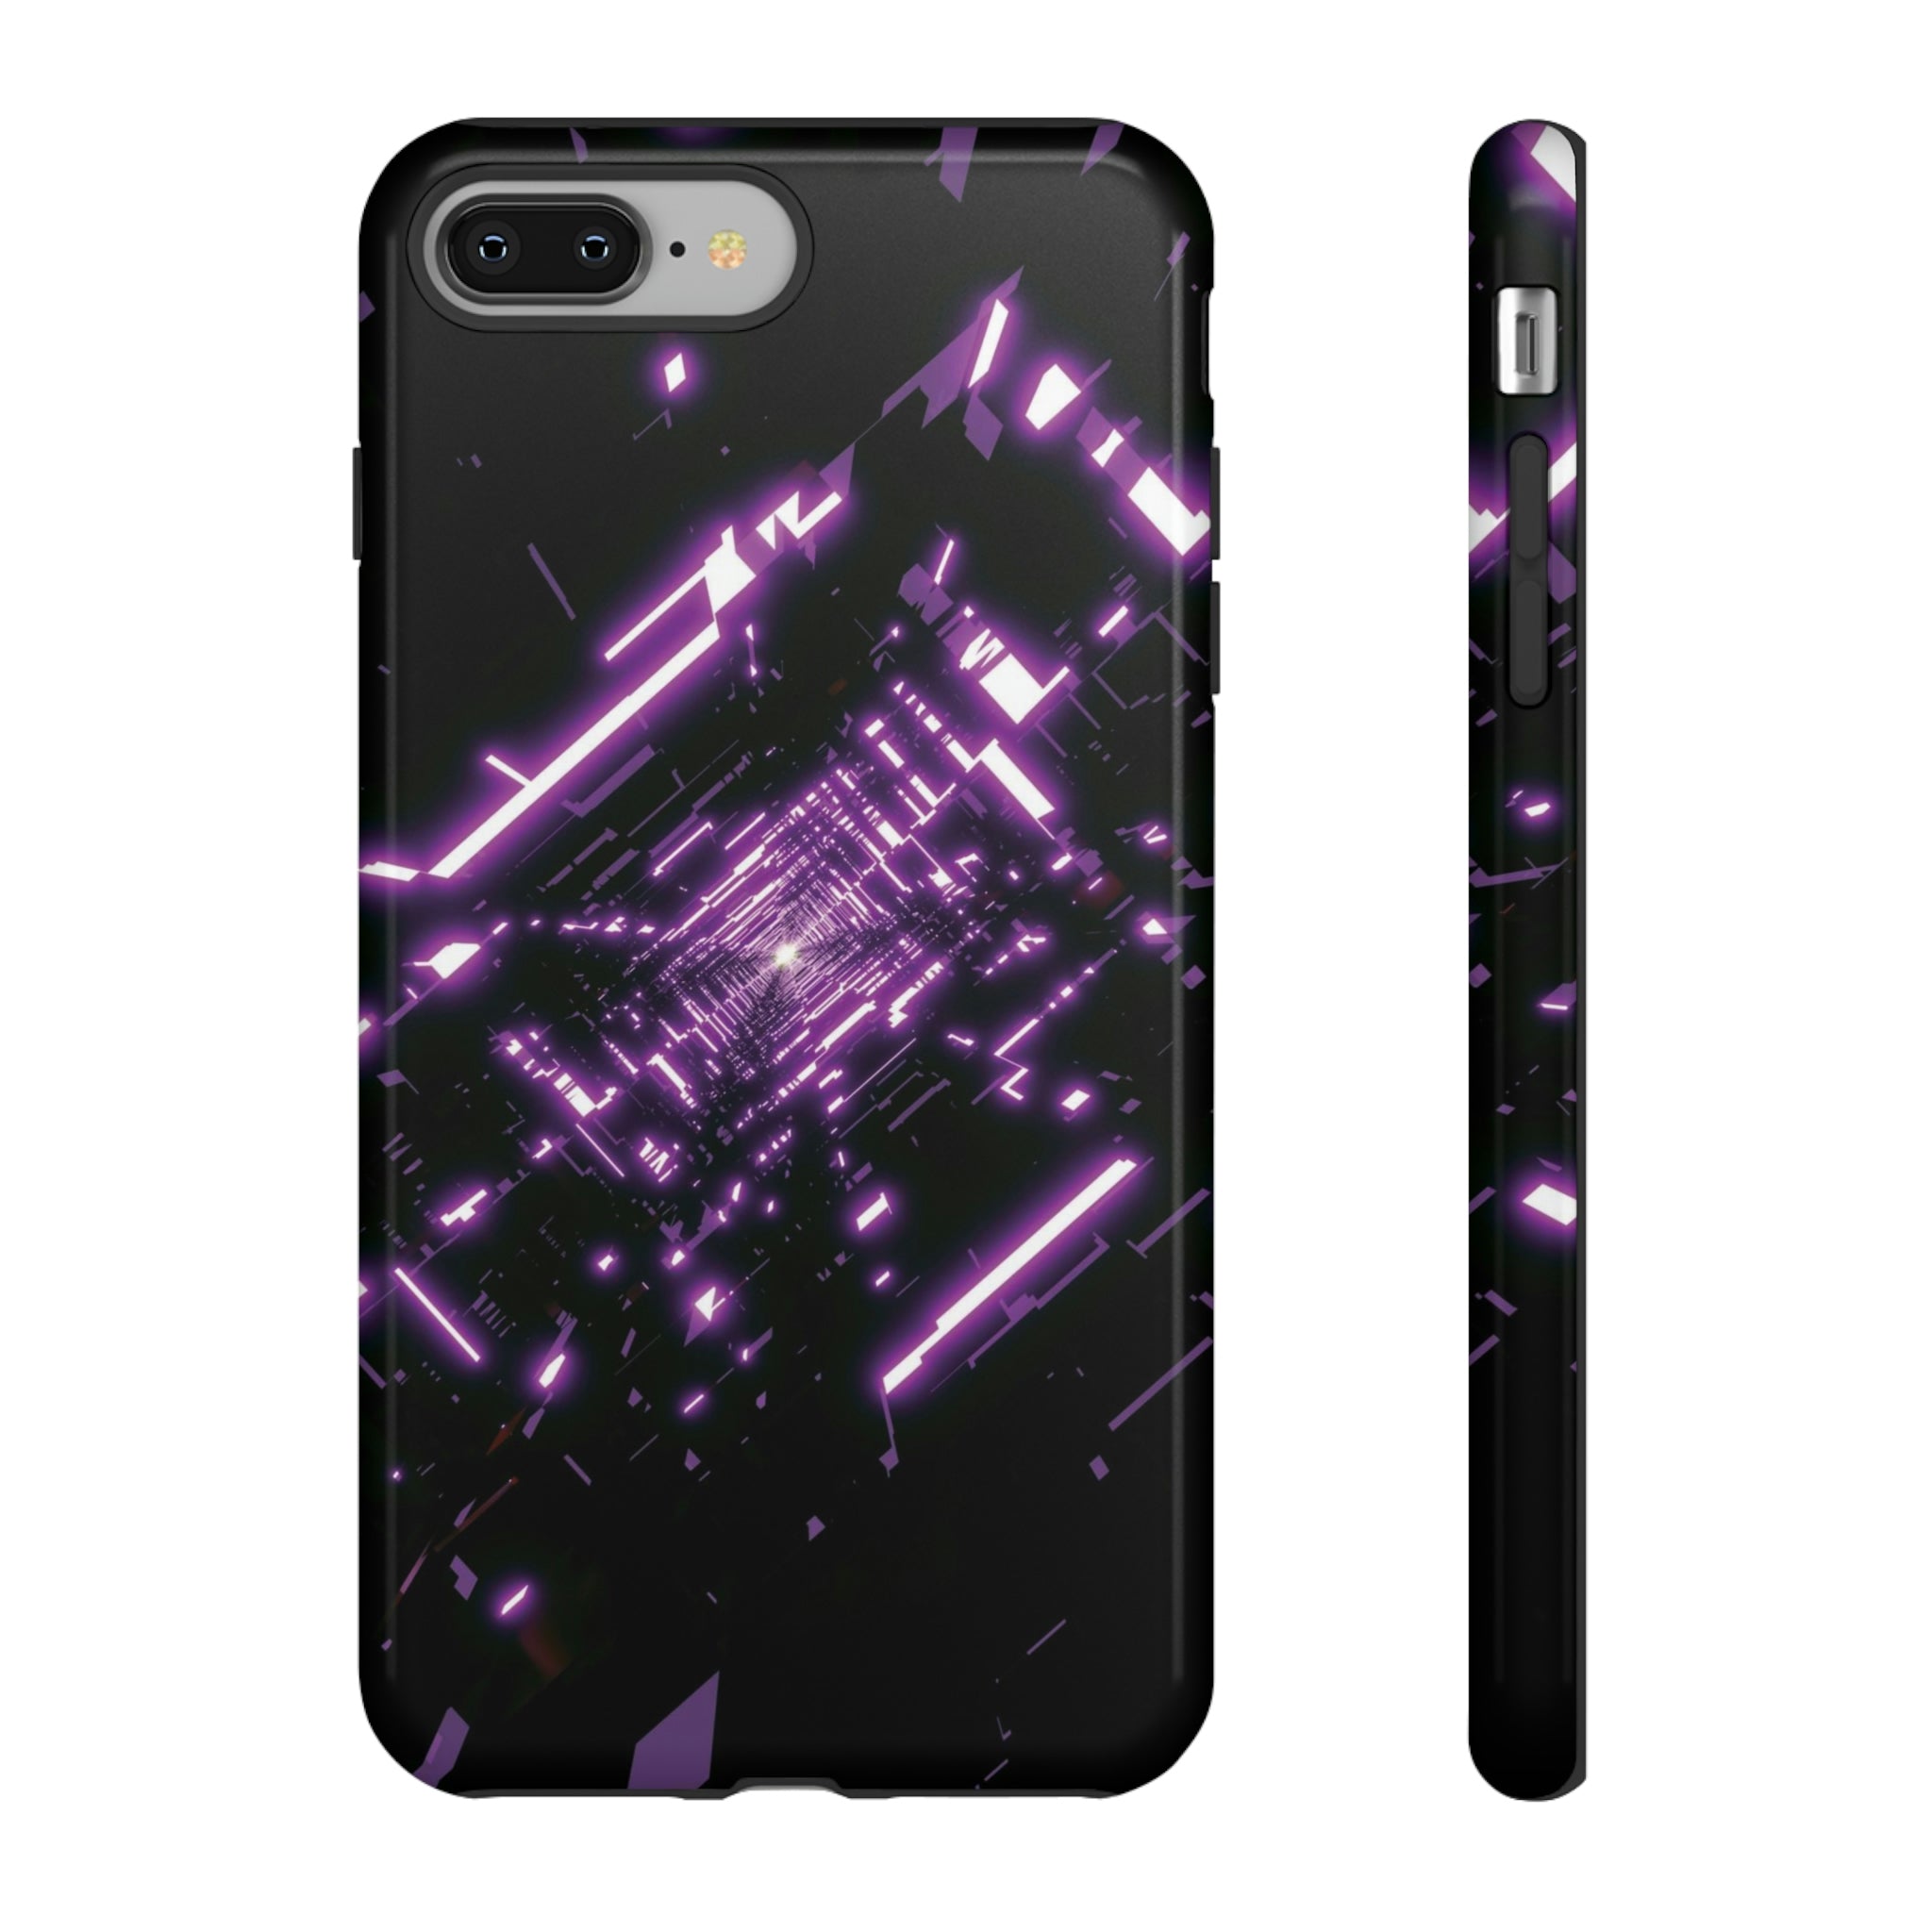 Digital Void - Dual Layered, Full Body, Armored Phone Case for iPhone 13/Samsung Galaxy S22/Google Pixel 6